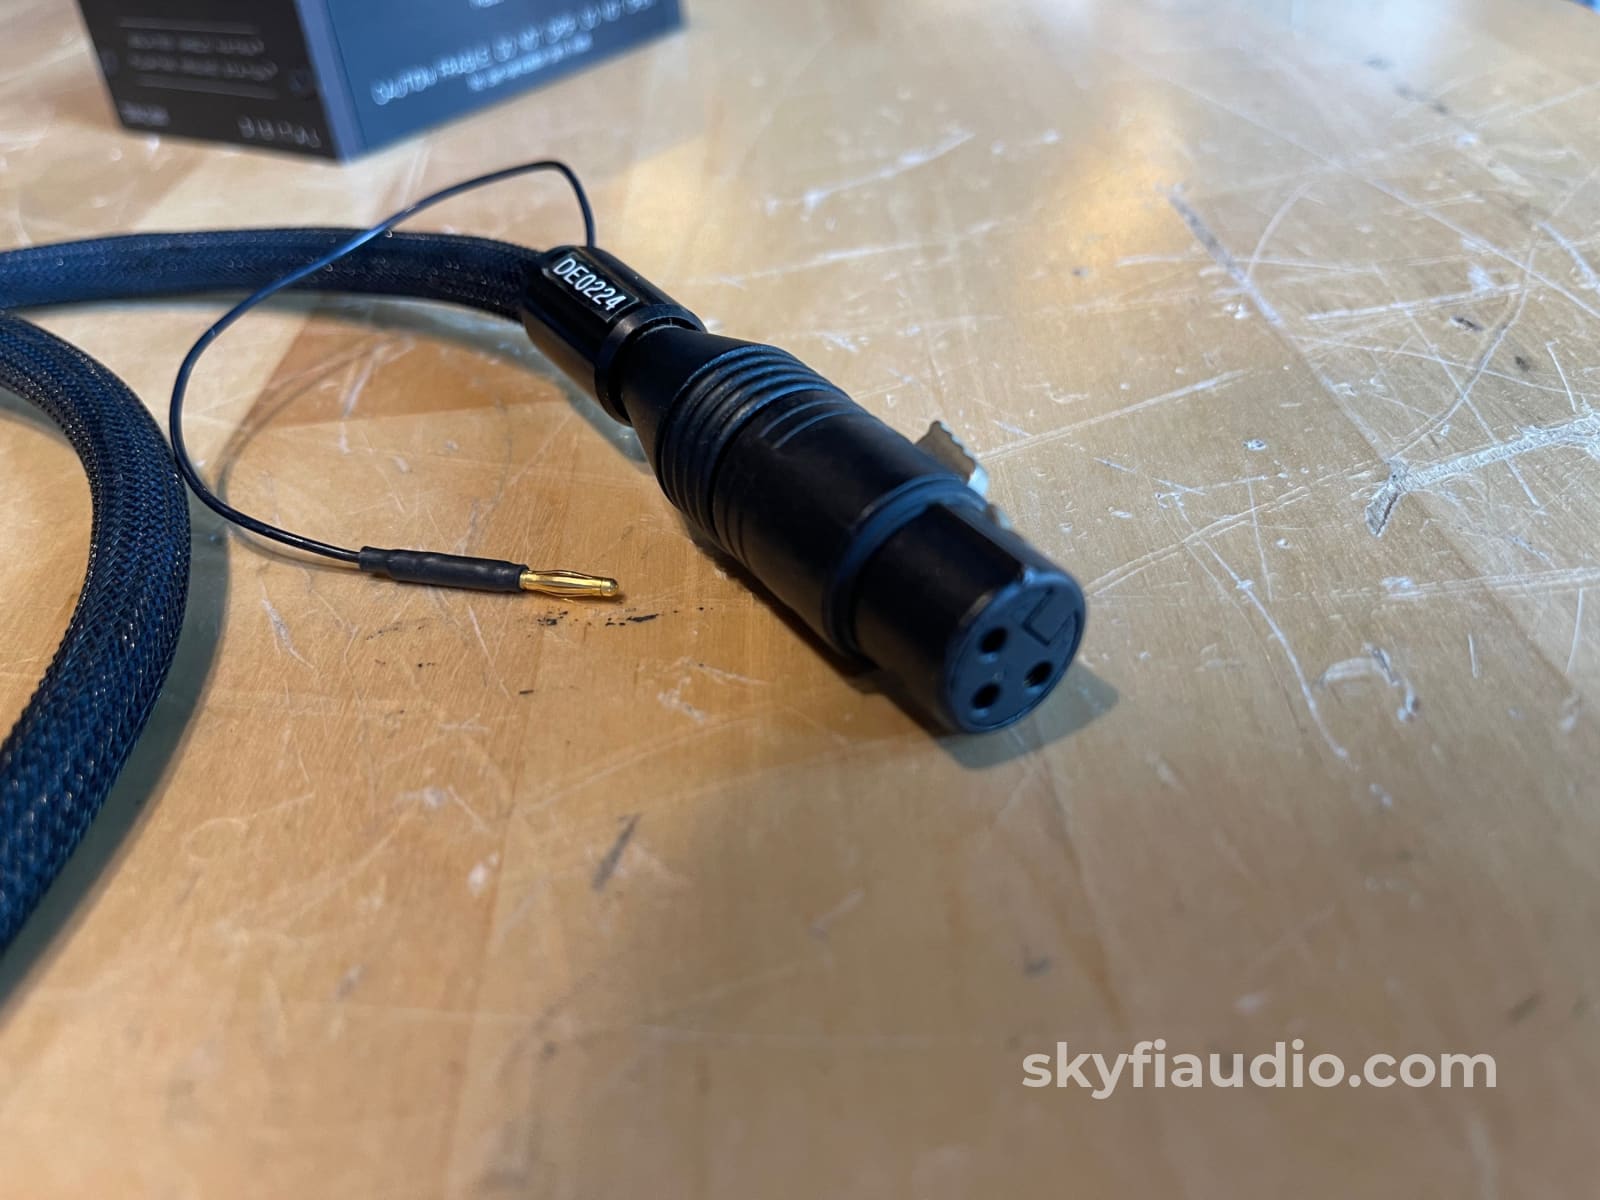 Tara Labs The One Digital Aes/Ebu Interconnect (Xlr) With Isolated Matrix Ground Station - 1M Cables